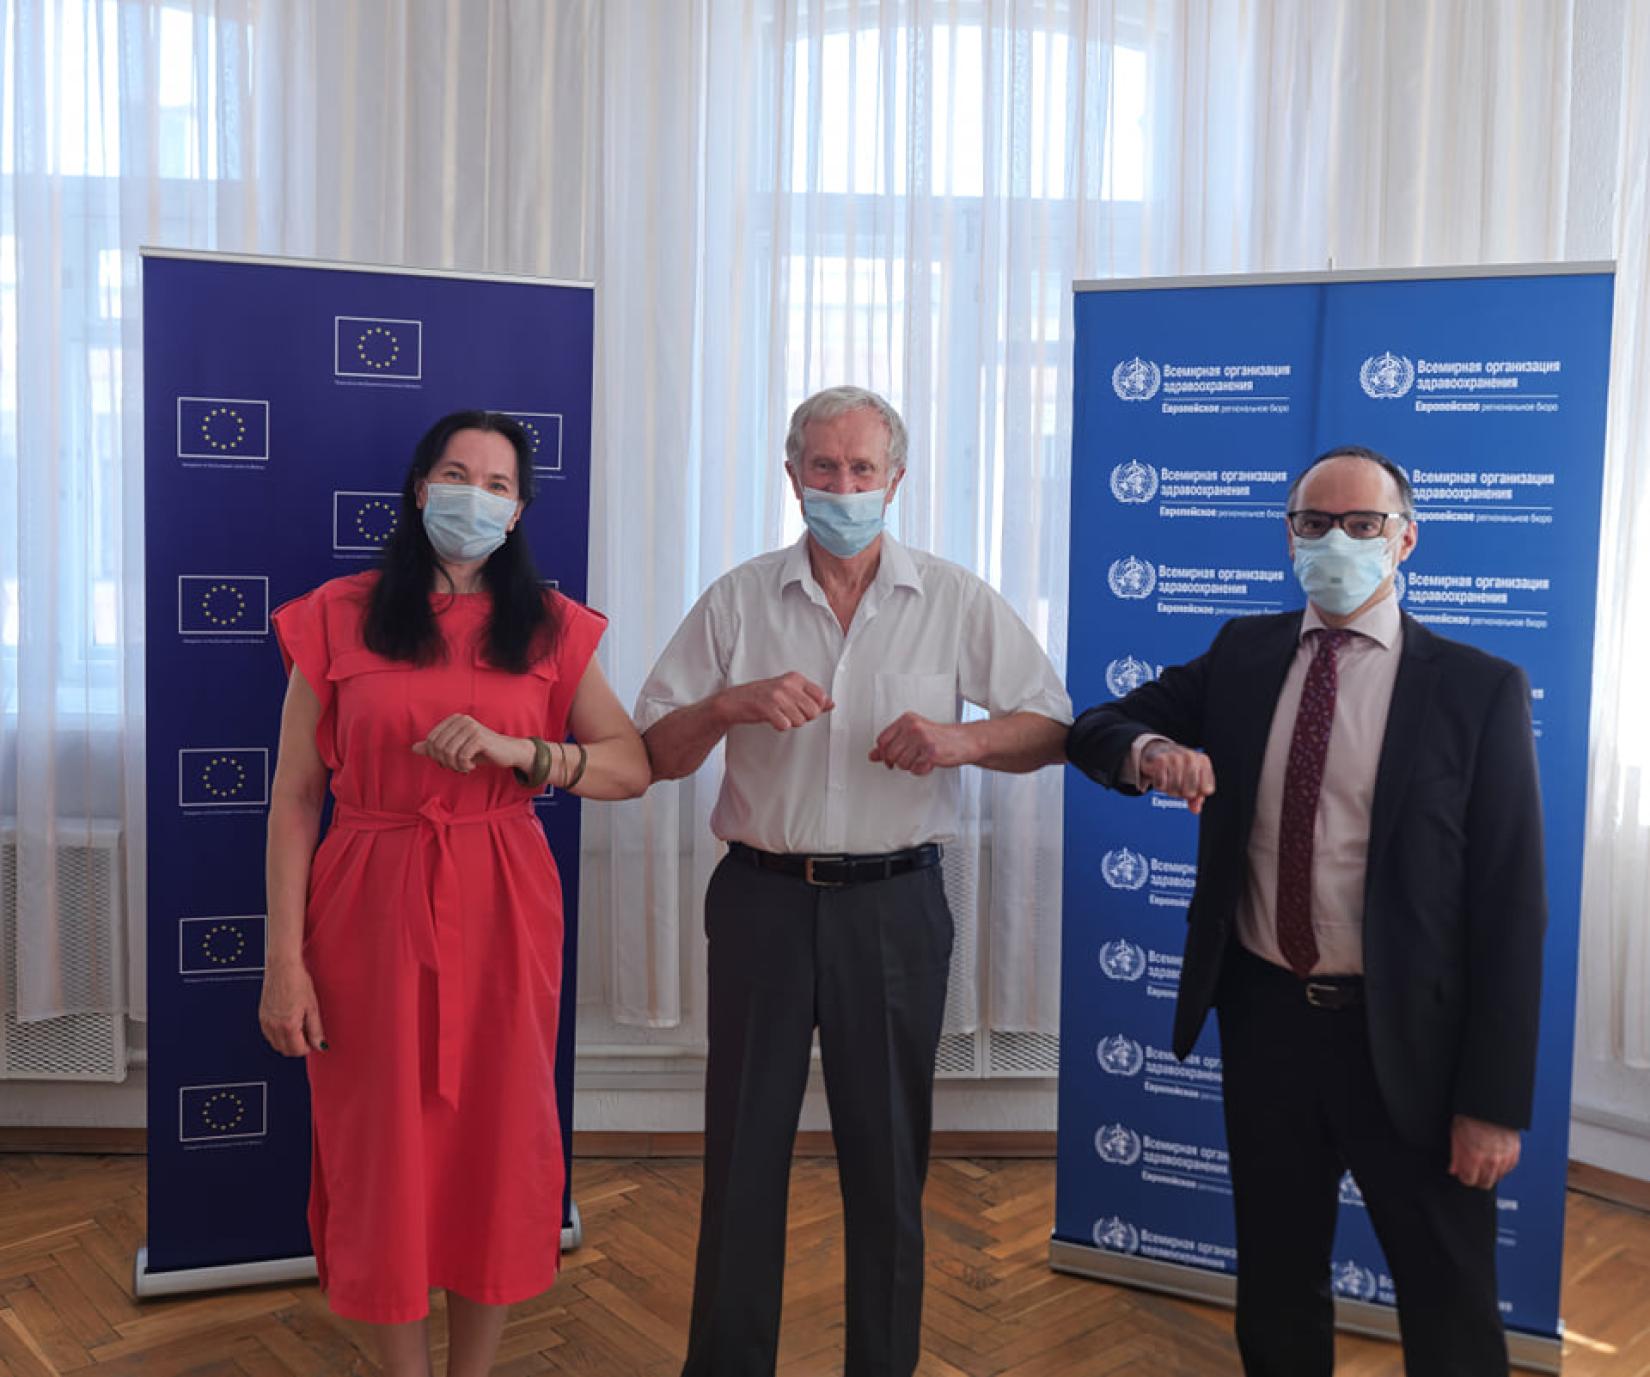 Dr. Masoud Dara, Head of WHO Country Office in Belarus, and Natalia Stasevich, Project Coordinator of the European Union Delegation to Belarus, handed over tablets to Sergei Saputo, Chairperson of the main board of the Belarusian Association of Hearing Impaired People. 